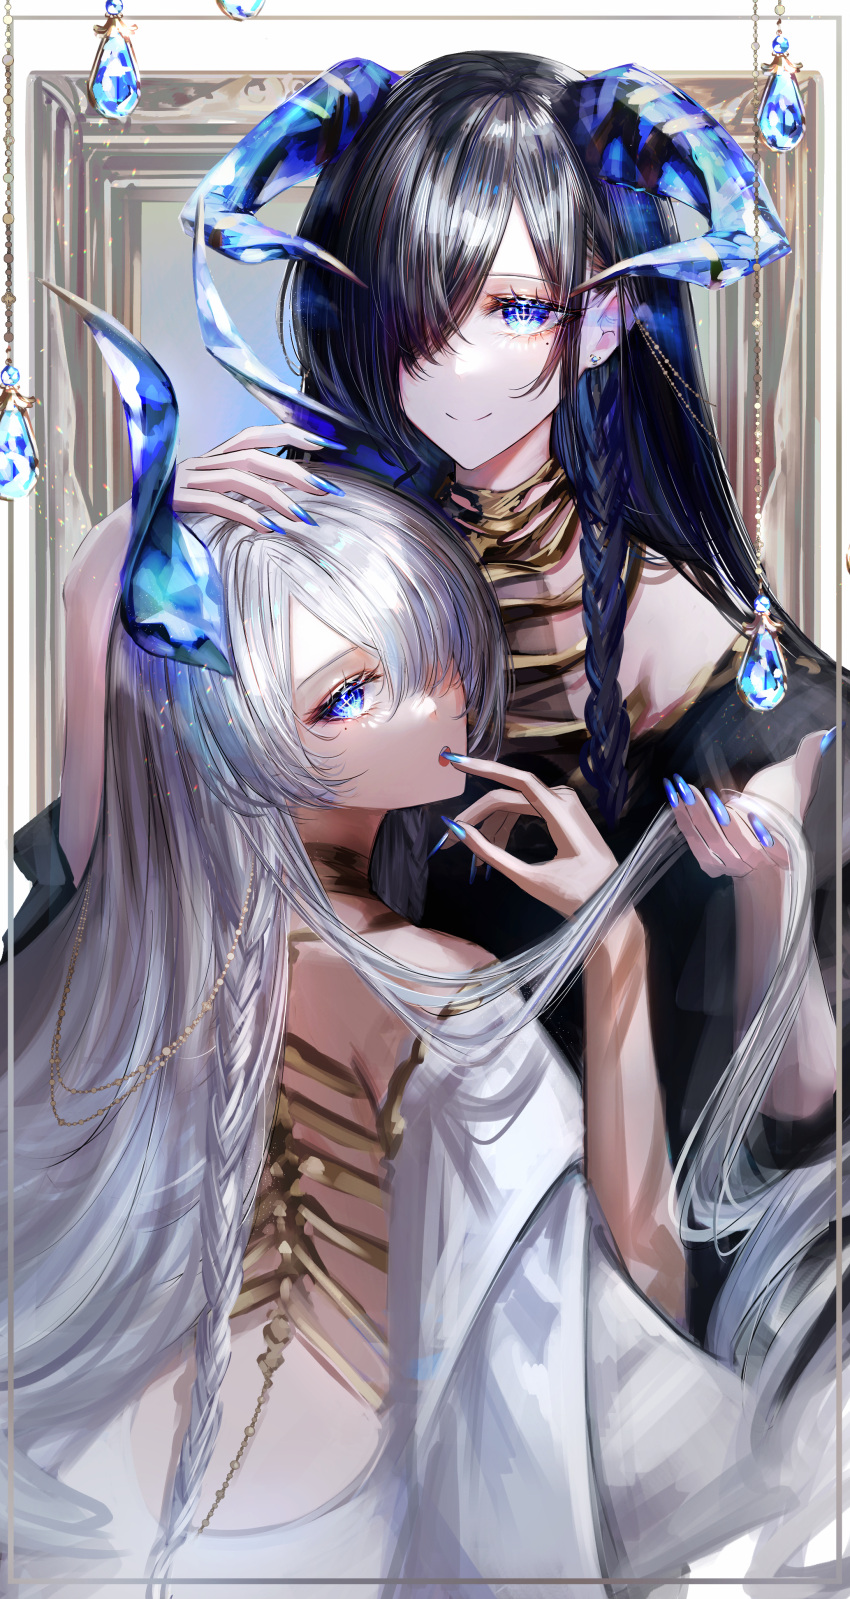 2girls absurdres akqne bangs black_hair blue_eyes blue_nails braid finger_to_mouth gem hair_lift hair_over_one_eye hand_on_another's_head highres horns long_hair looking_at_viewer multiple_girls open_mouth original side_braid smile white_hair